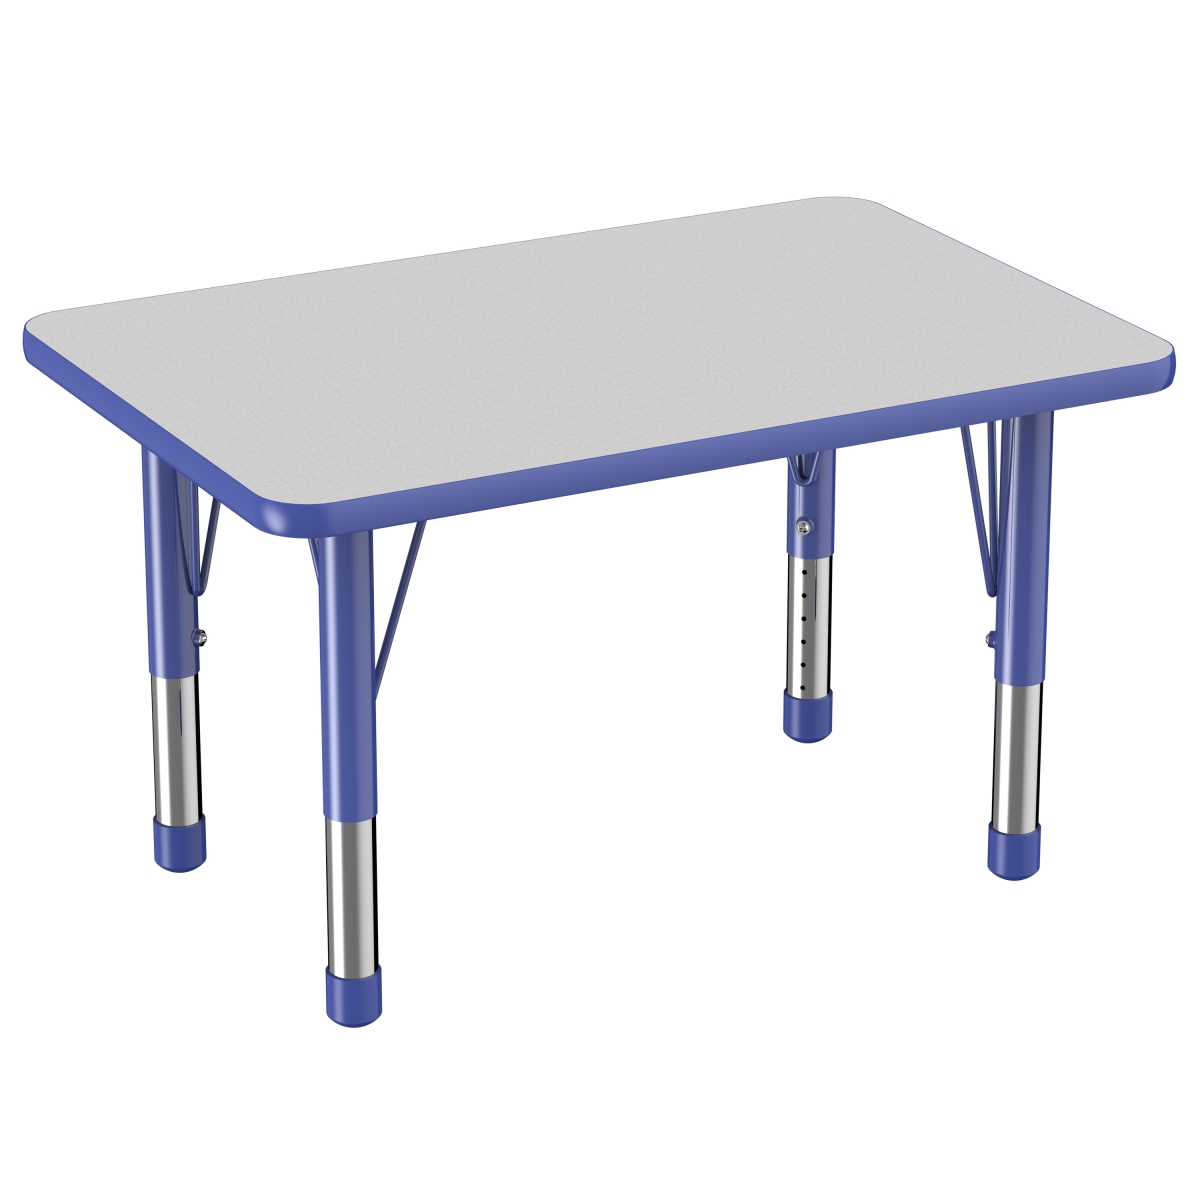 10005-gybl 24 X 36 In. Rectangle T-mold Adjustable Activity Table With Chunky Leg - Grey & Blue